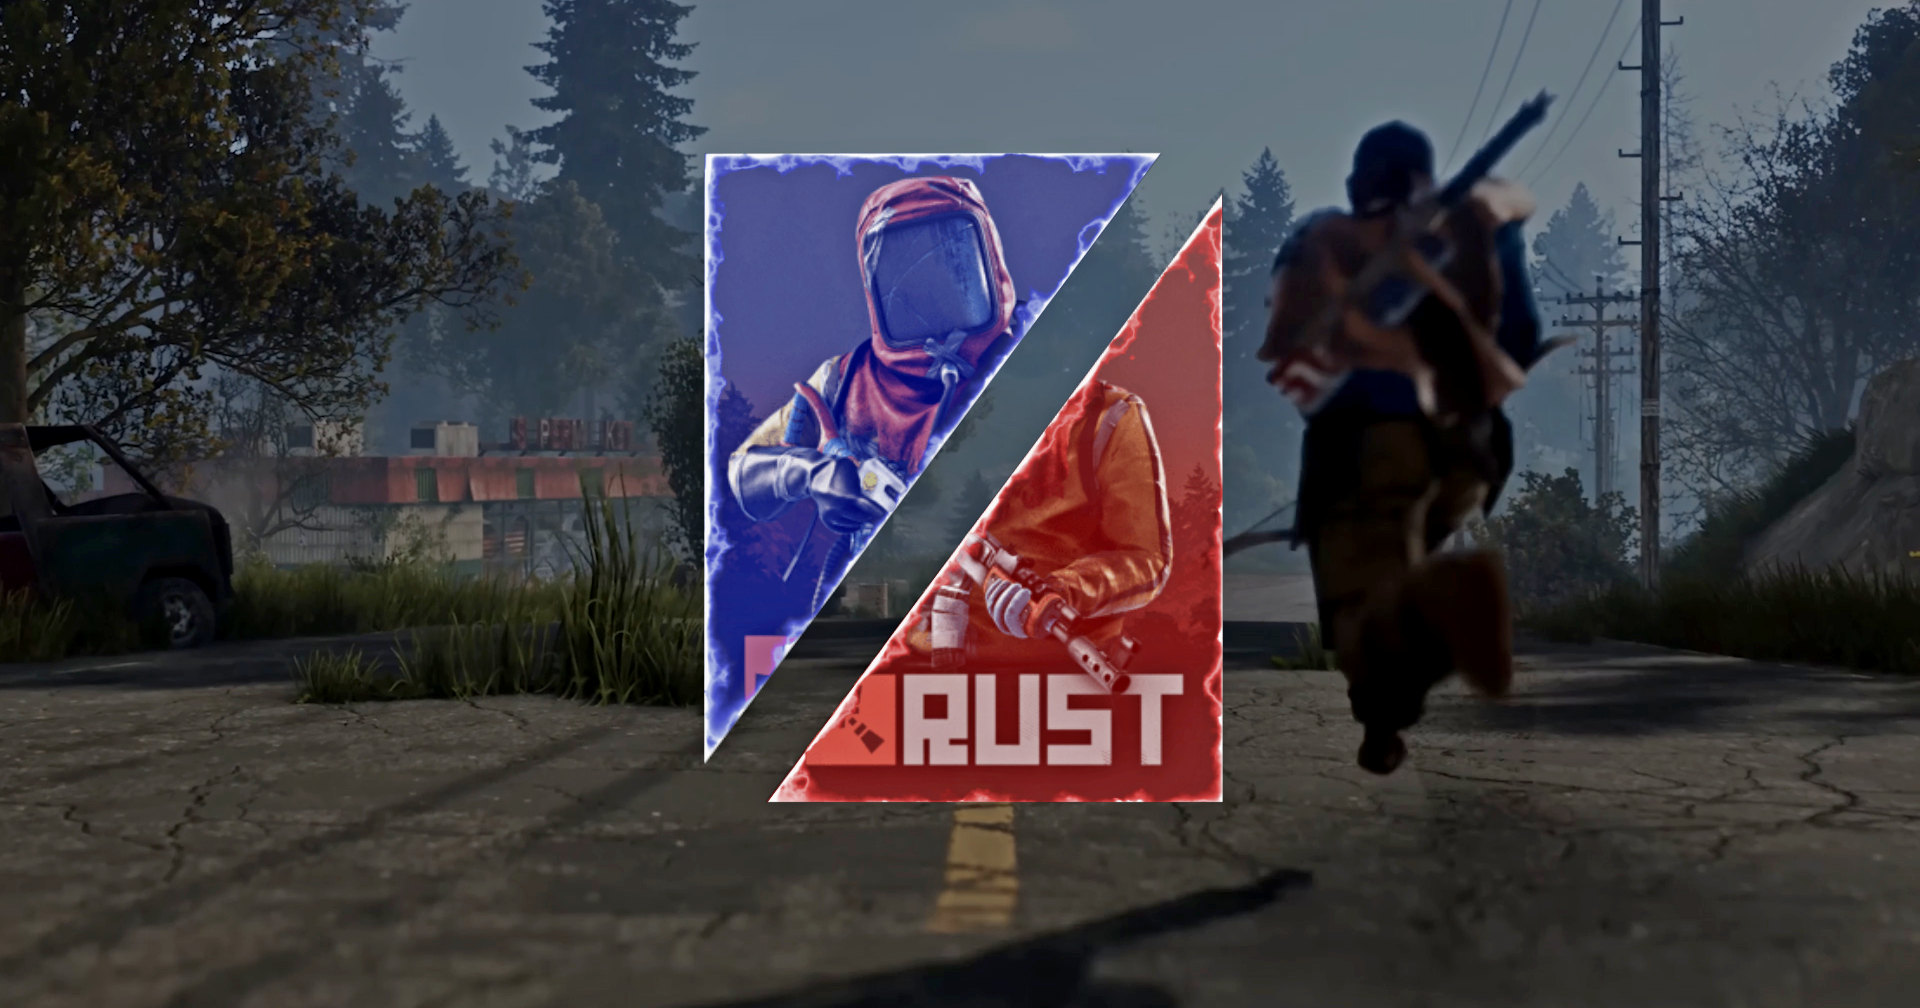 A player runs down the street in the background in blur. In the foreground you can see the logo of the Rust game in blue red.